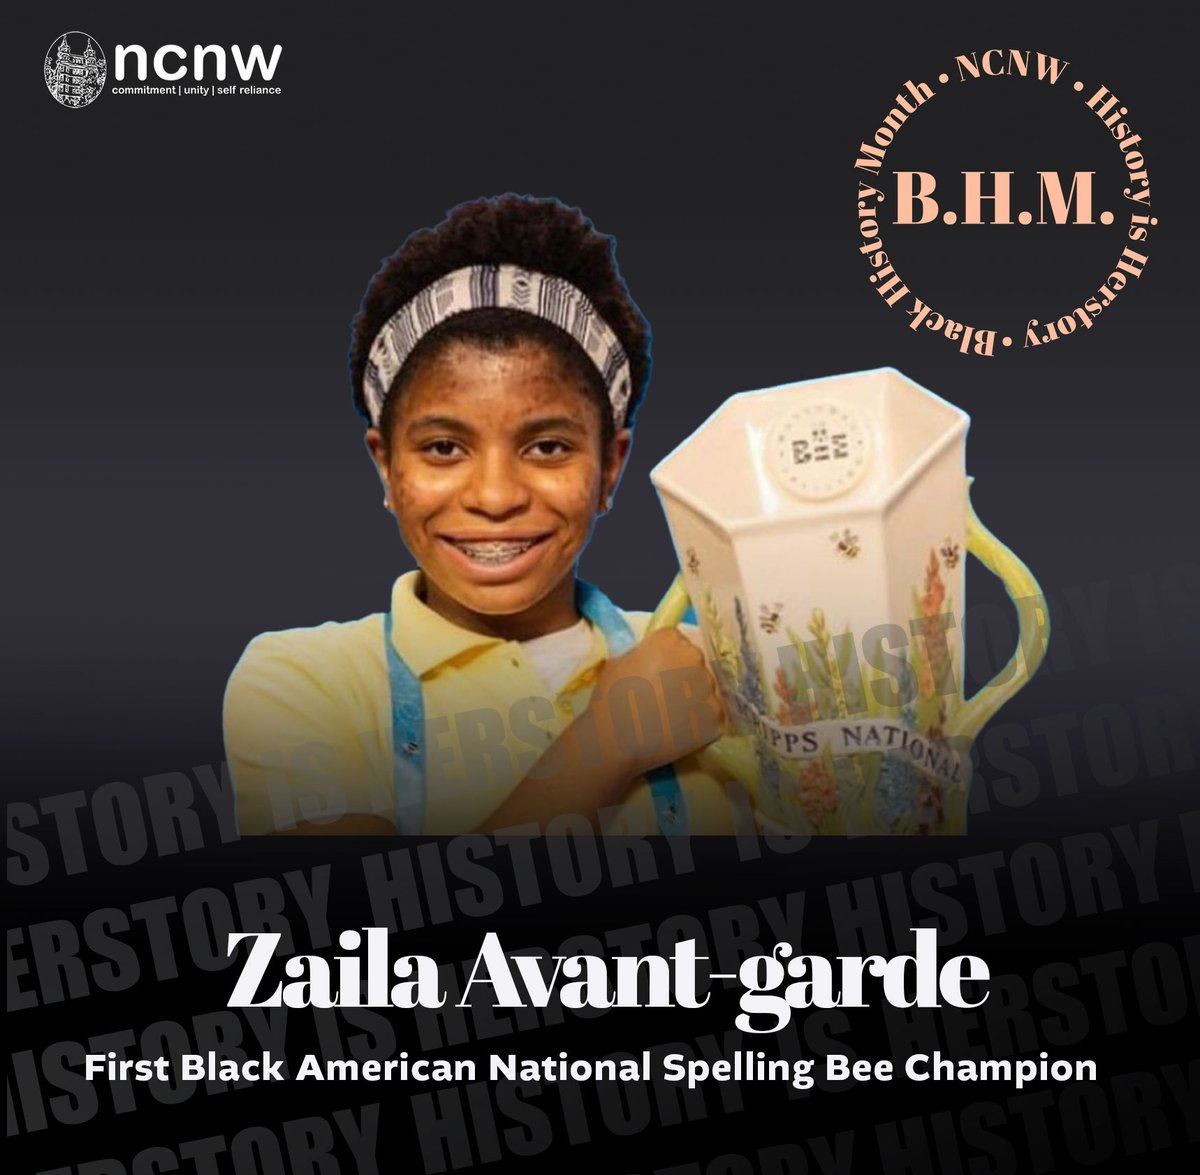 Zaila Avant-garde became the first Black American to win and hold the title of national spelling bee champion on July 8, 2021. Avante-garde aspires to be an Archaeologist, a WNBA player, and to work with NASA. (Credit: TIME & Blackpast.org) #ncnw #blackhistorymonth